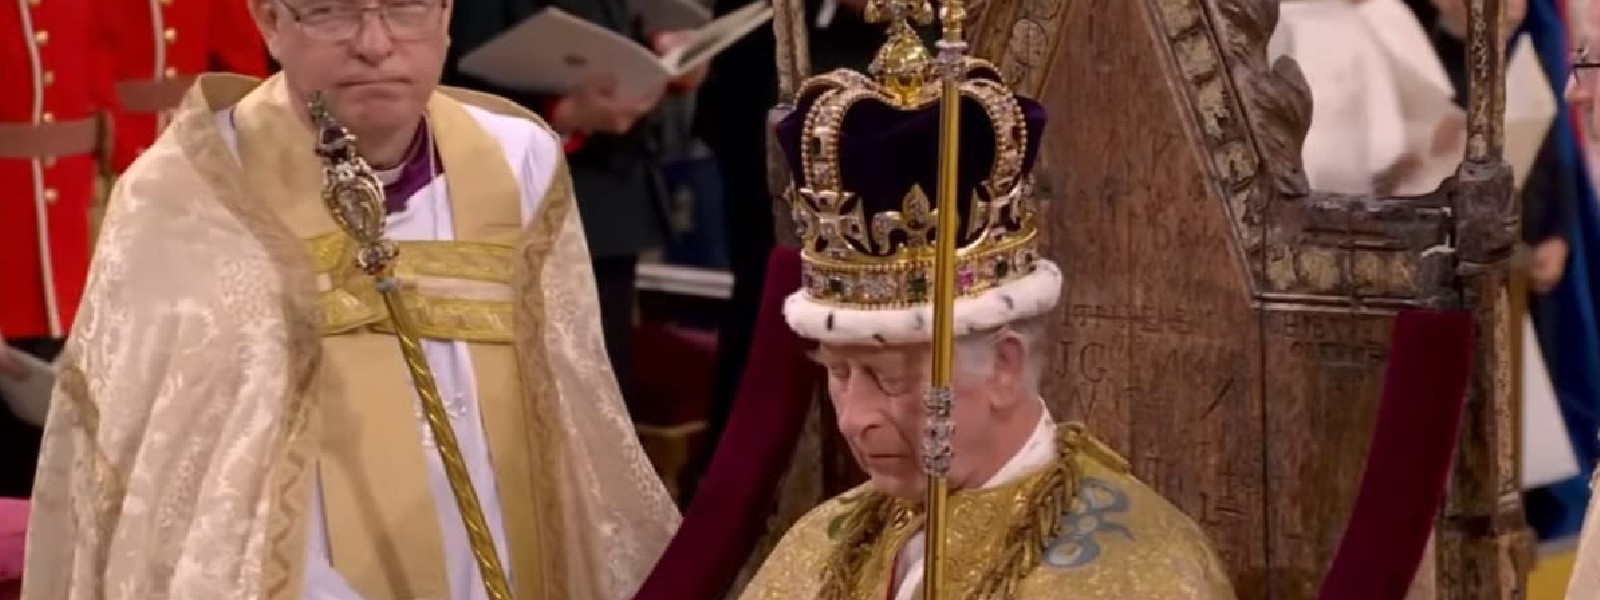 King Charles III officially crowned